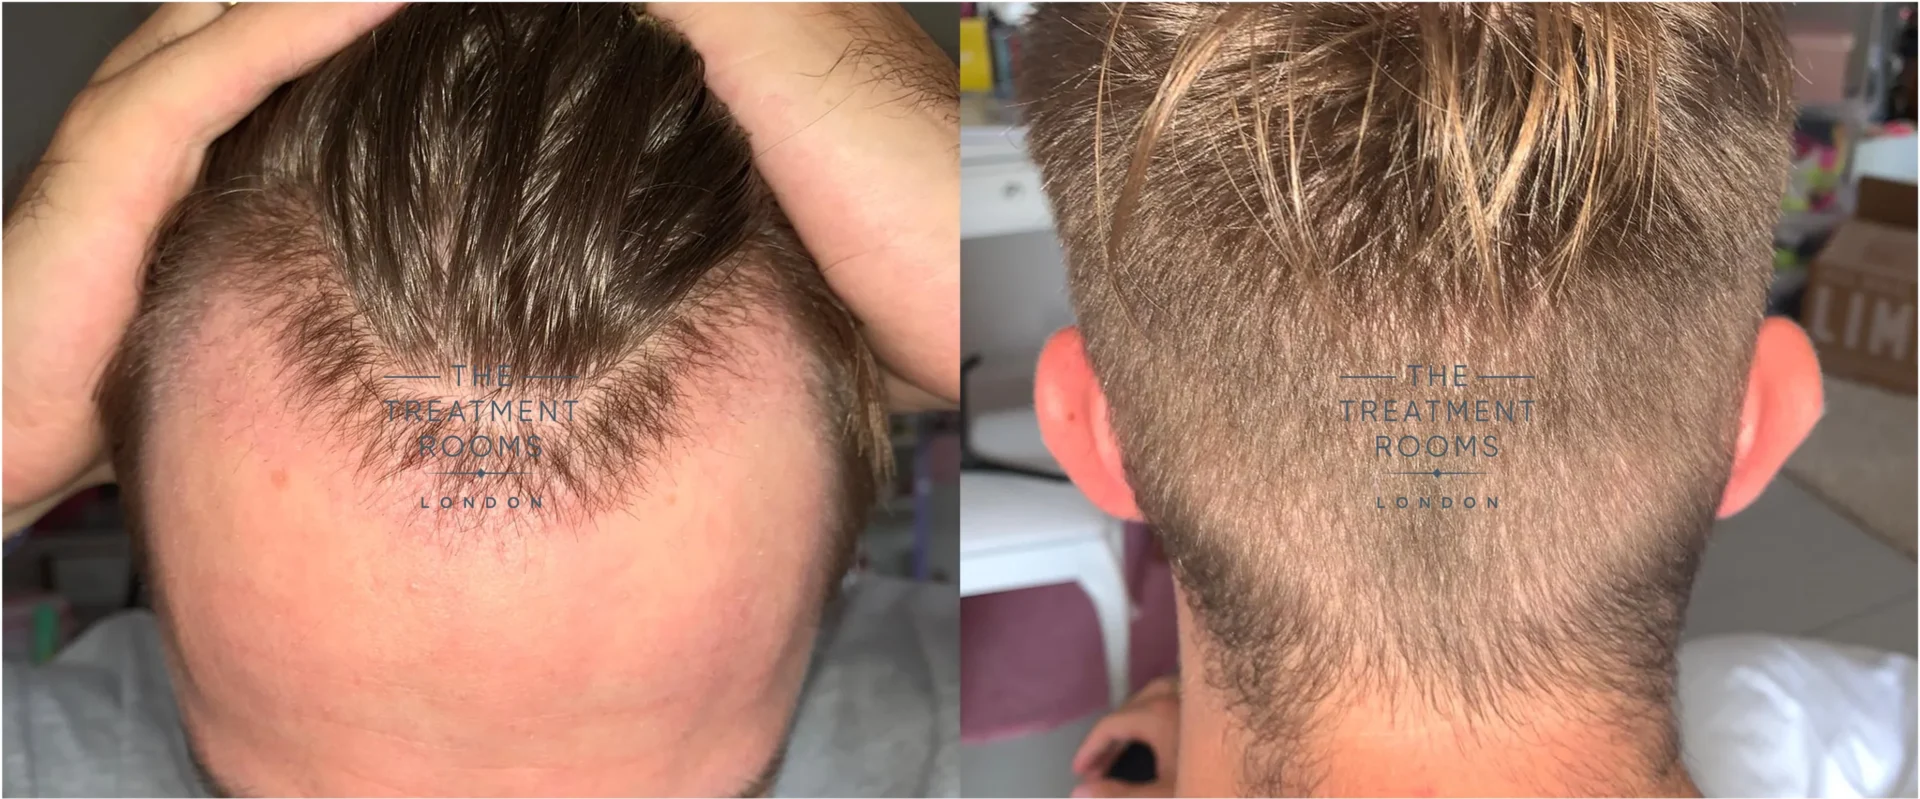 Unshaven hair transplant month 1 after surgery